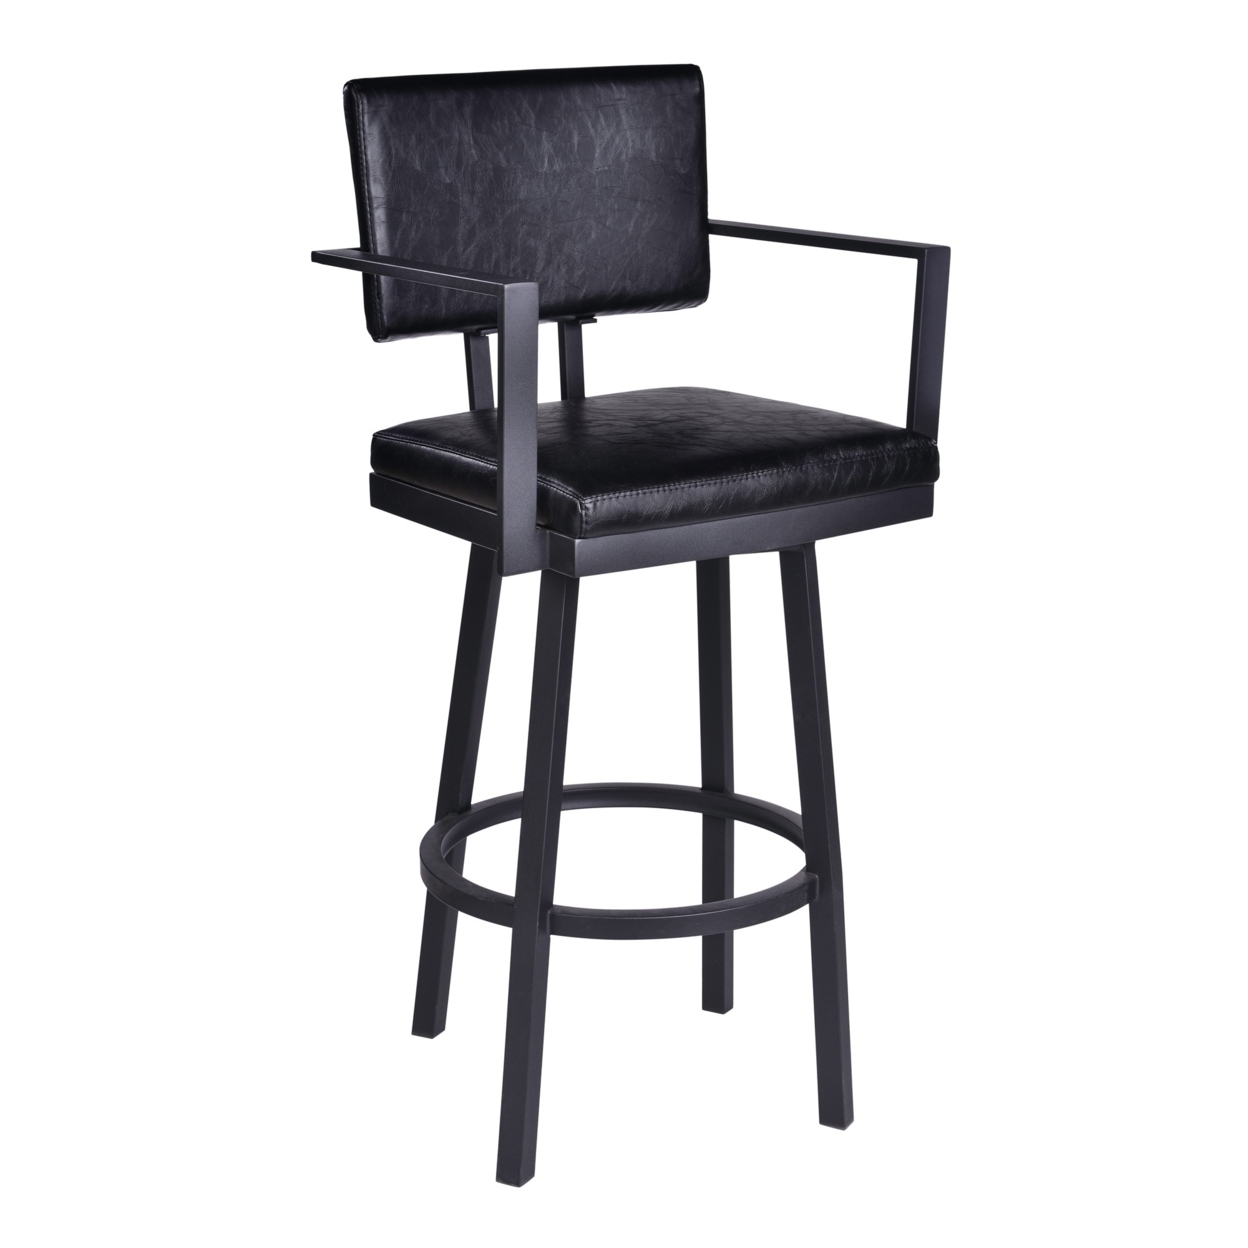 Lumbar Back Faux Leather Barstool With Stainless Steel Legs And Arms, Black- Saltoro Sherpi